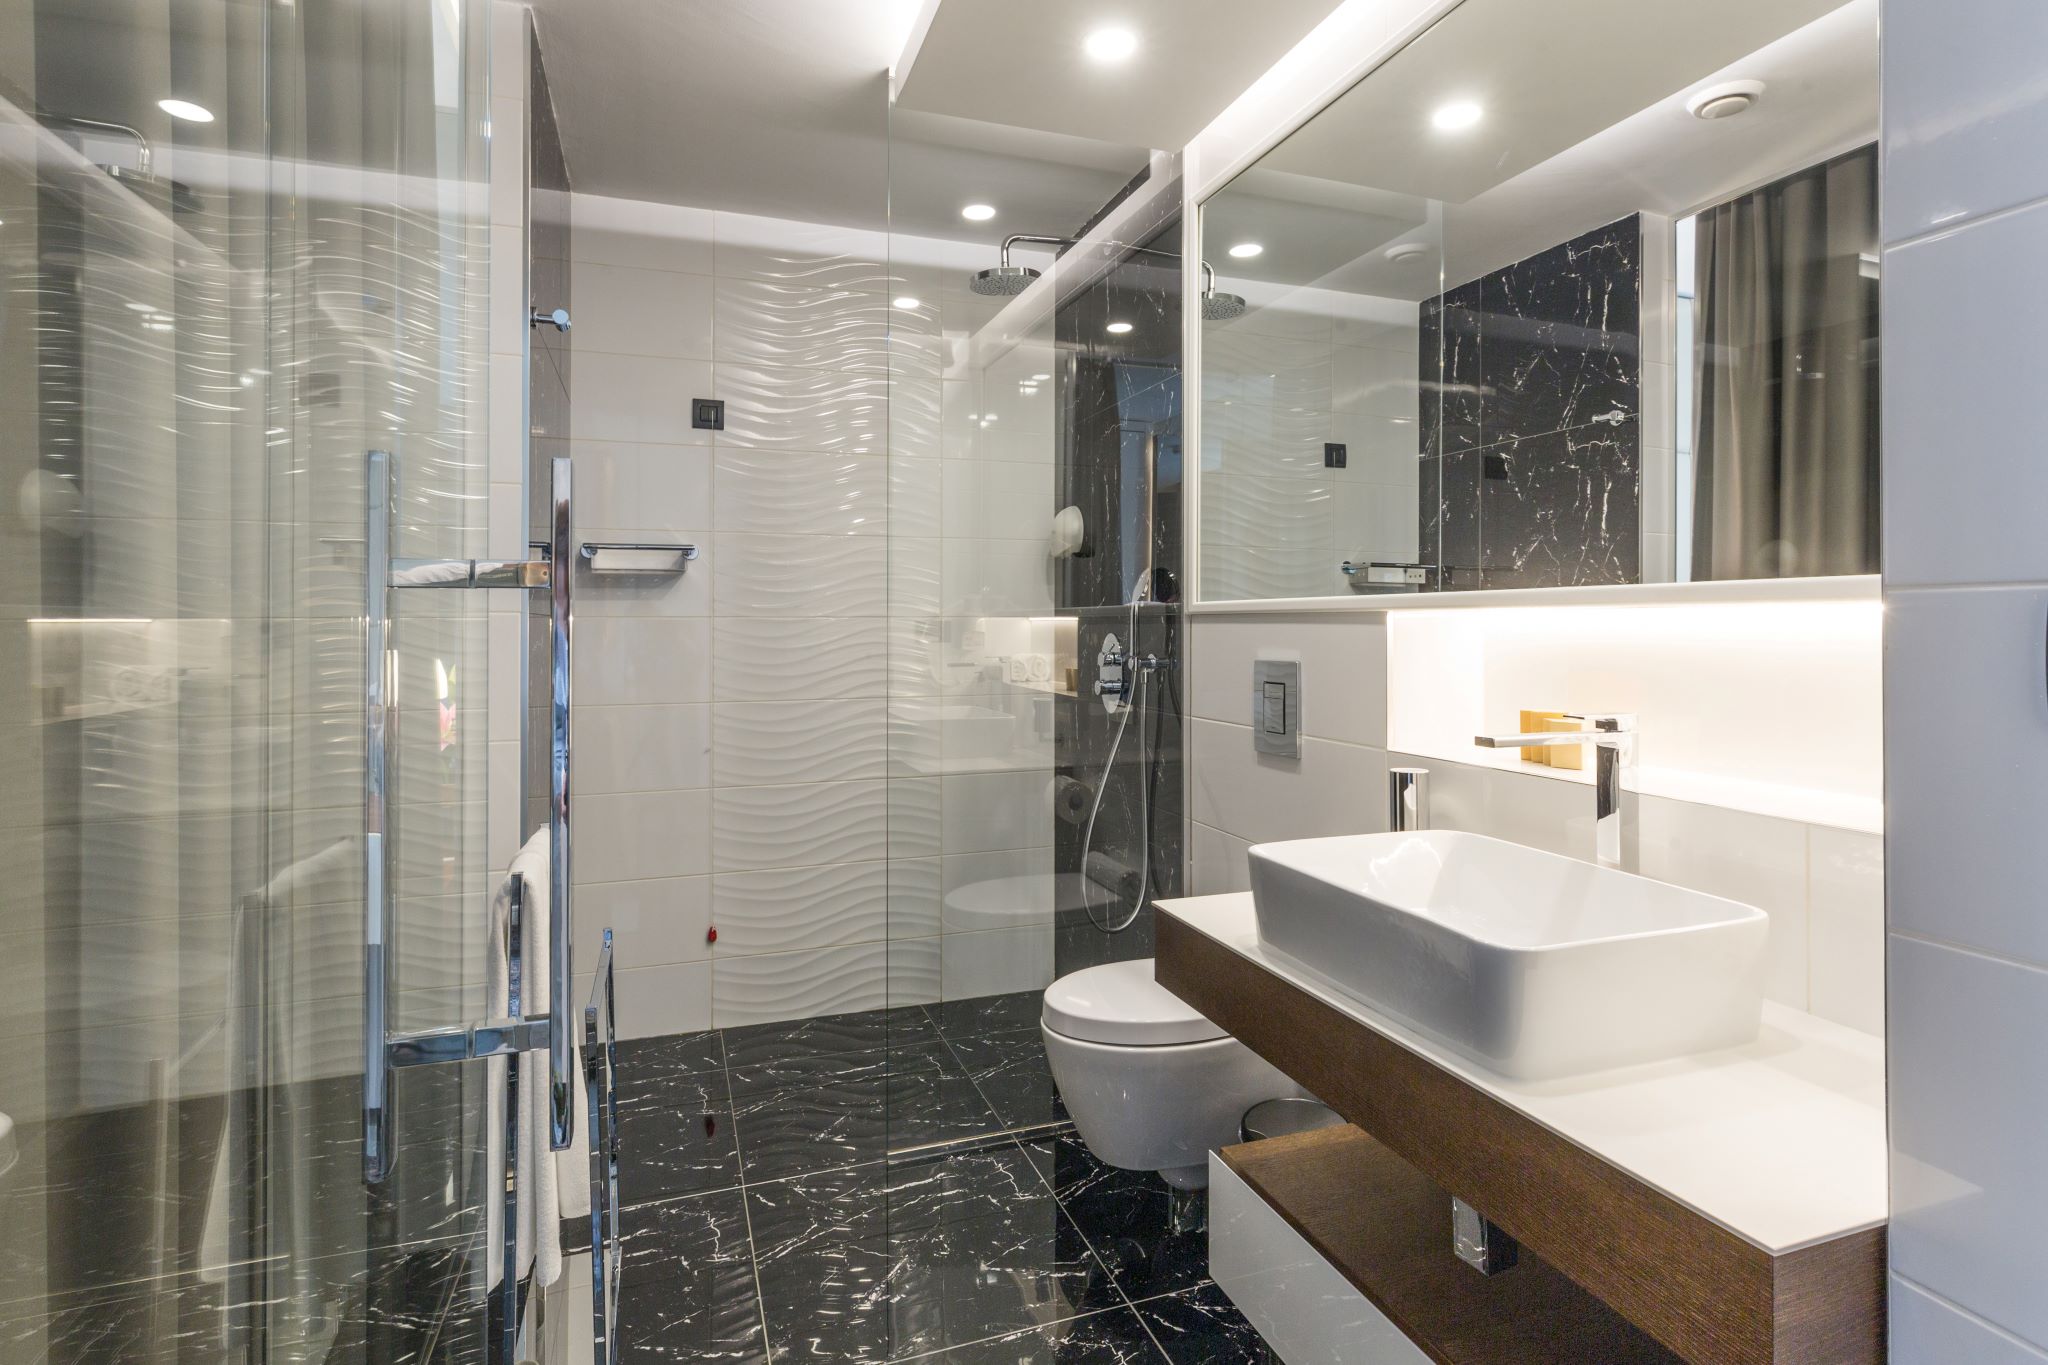 interior of a luxury hotel bathroom with glass shower and black marble floor